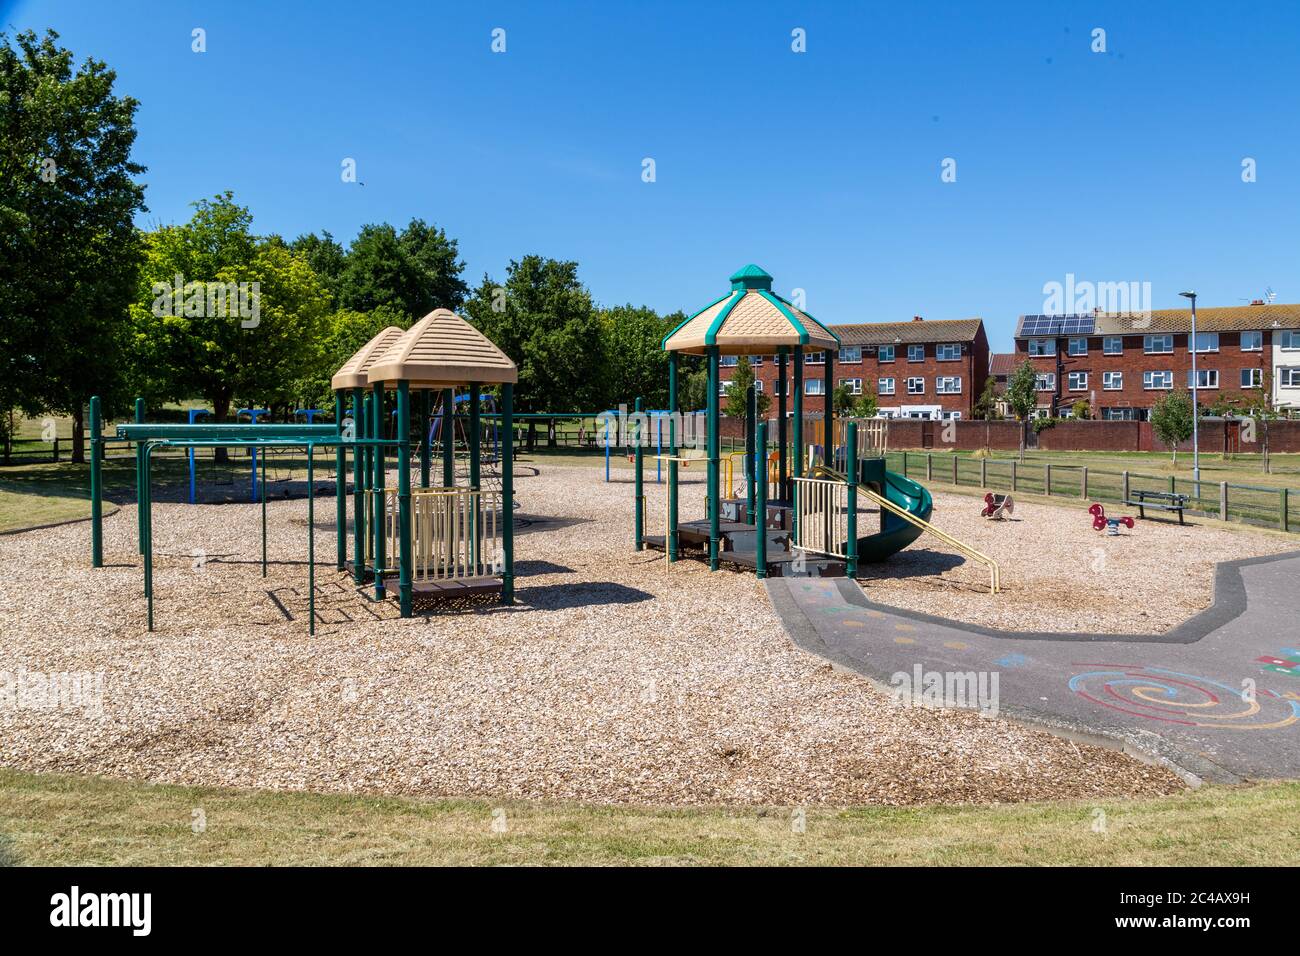 a child's playground or park empty on a summers day during Covid-19 lockdown Stock Photo